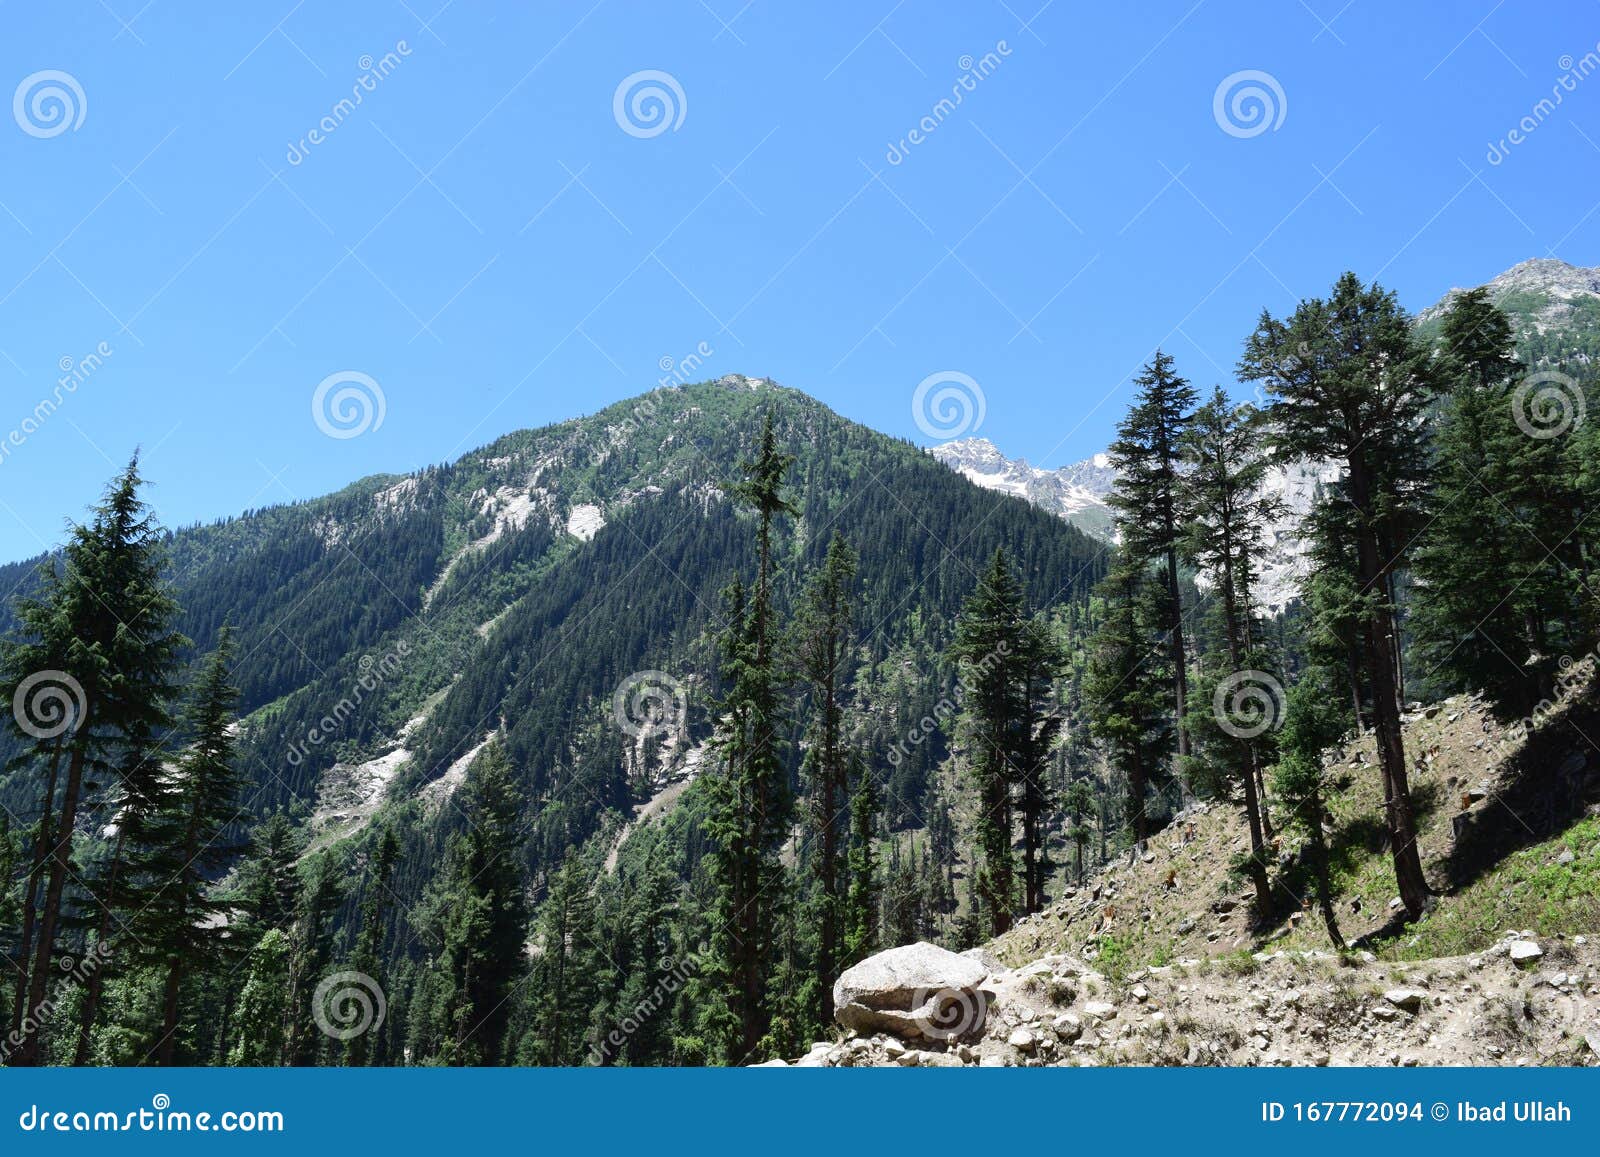 landscpe view of trees and hills of himalayan mountain series in northren kp, pakistan